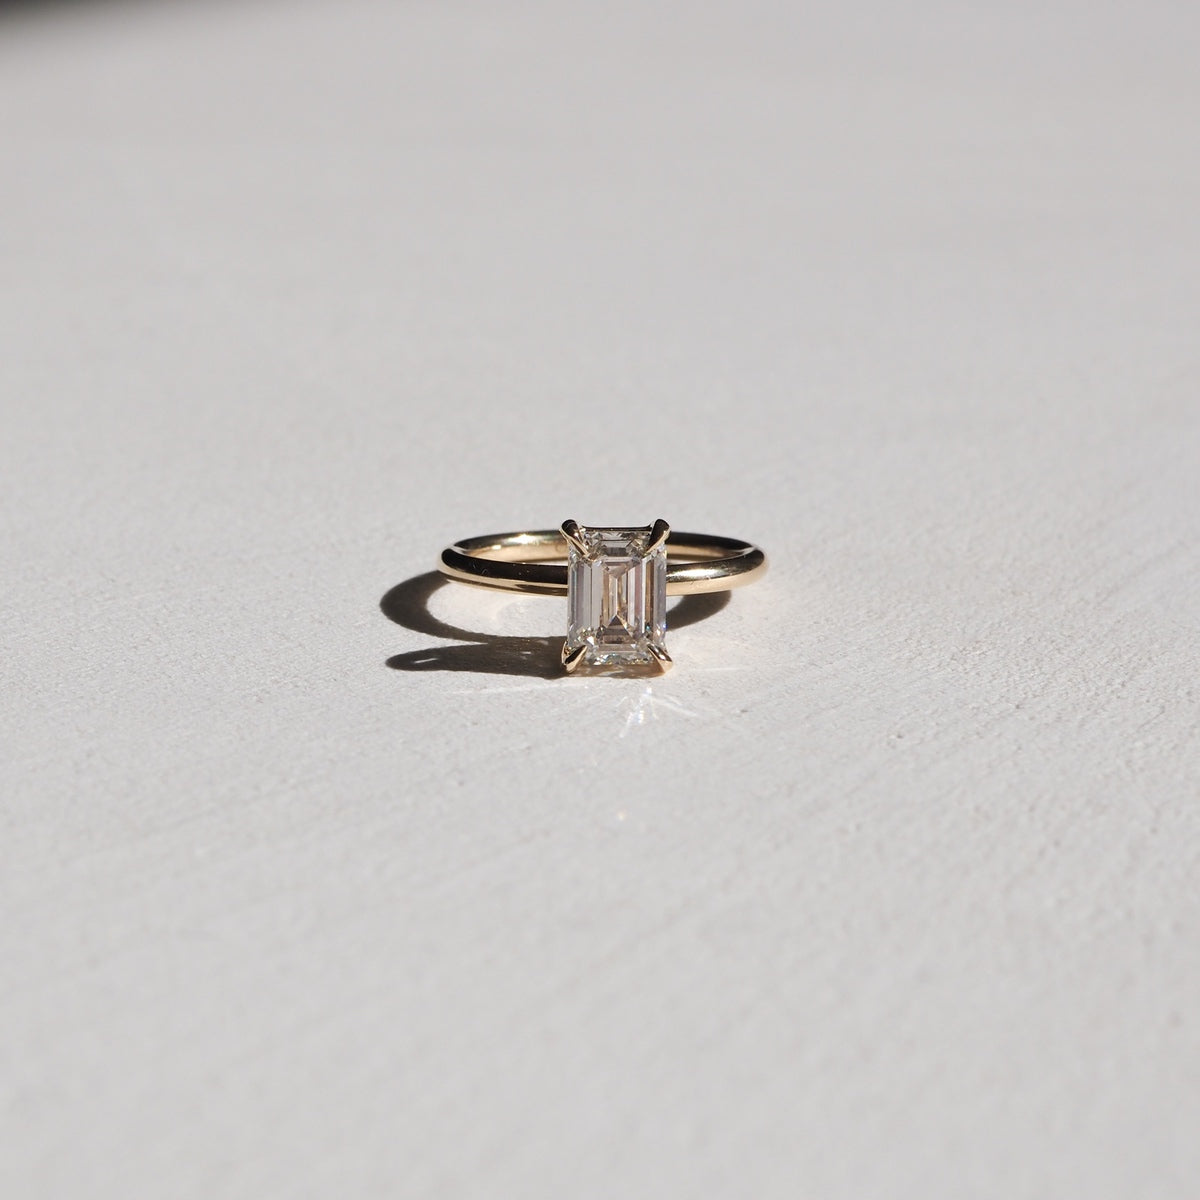 Simple, elegant and perfectly set. Eva features a beautiful emerald cut lab-grown diamond, held within a basket setting by four subtle talon claws. 18ct solid yellow gold 